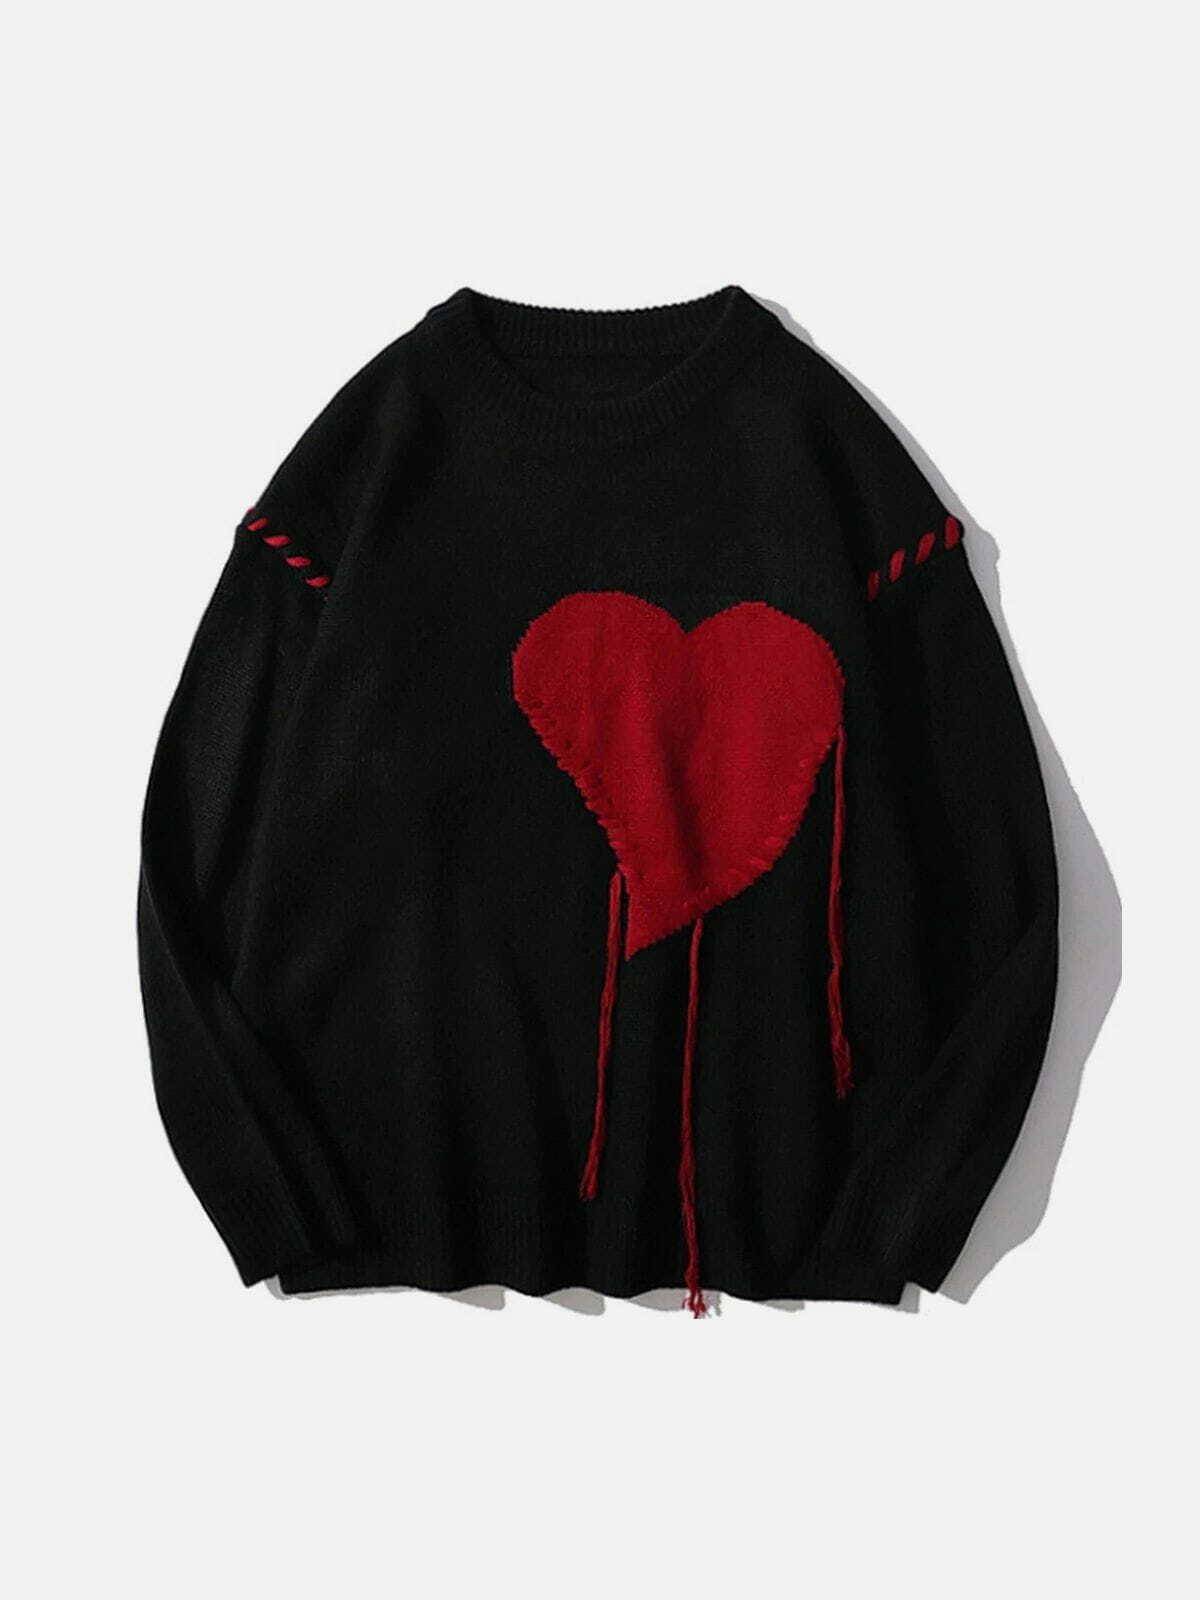 embroidered love sweater quirky y2k fashion charm 1271